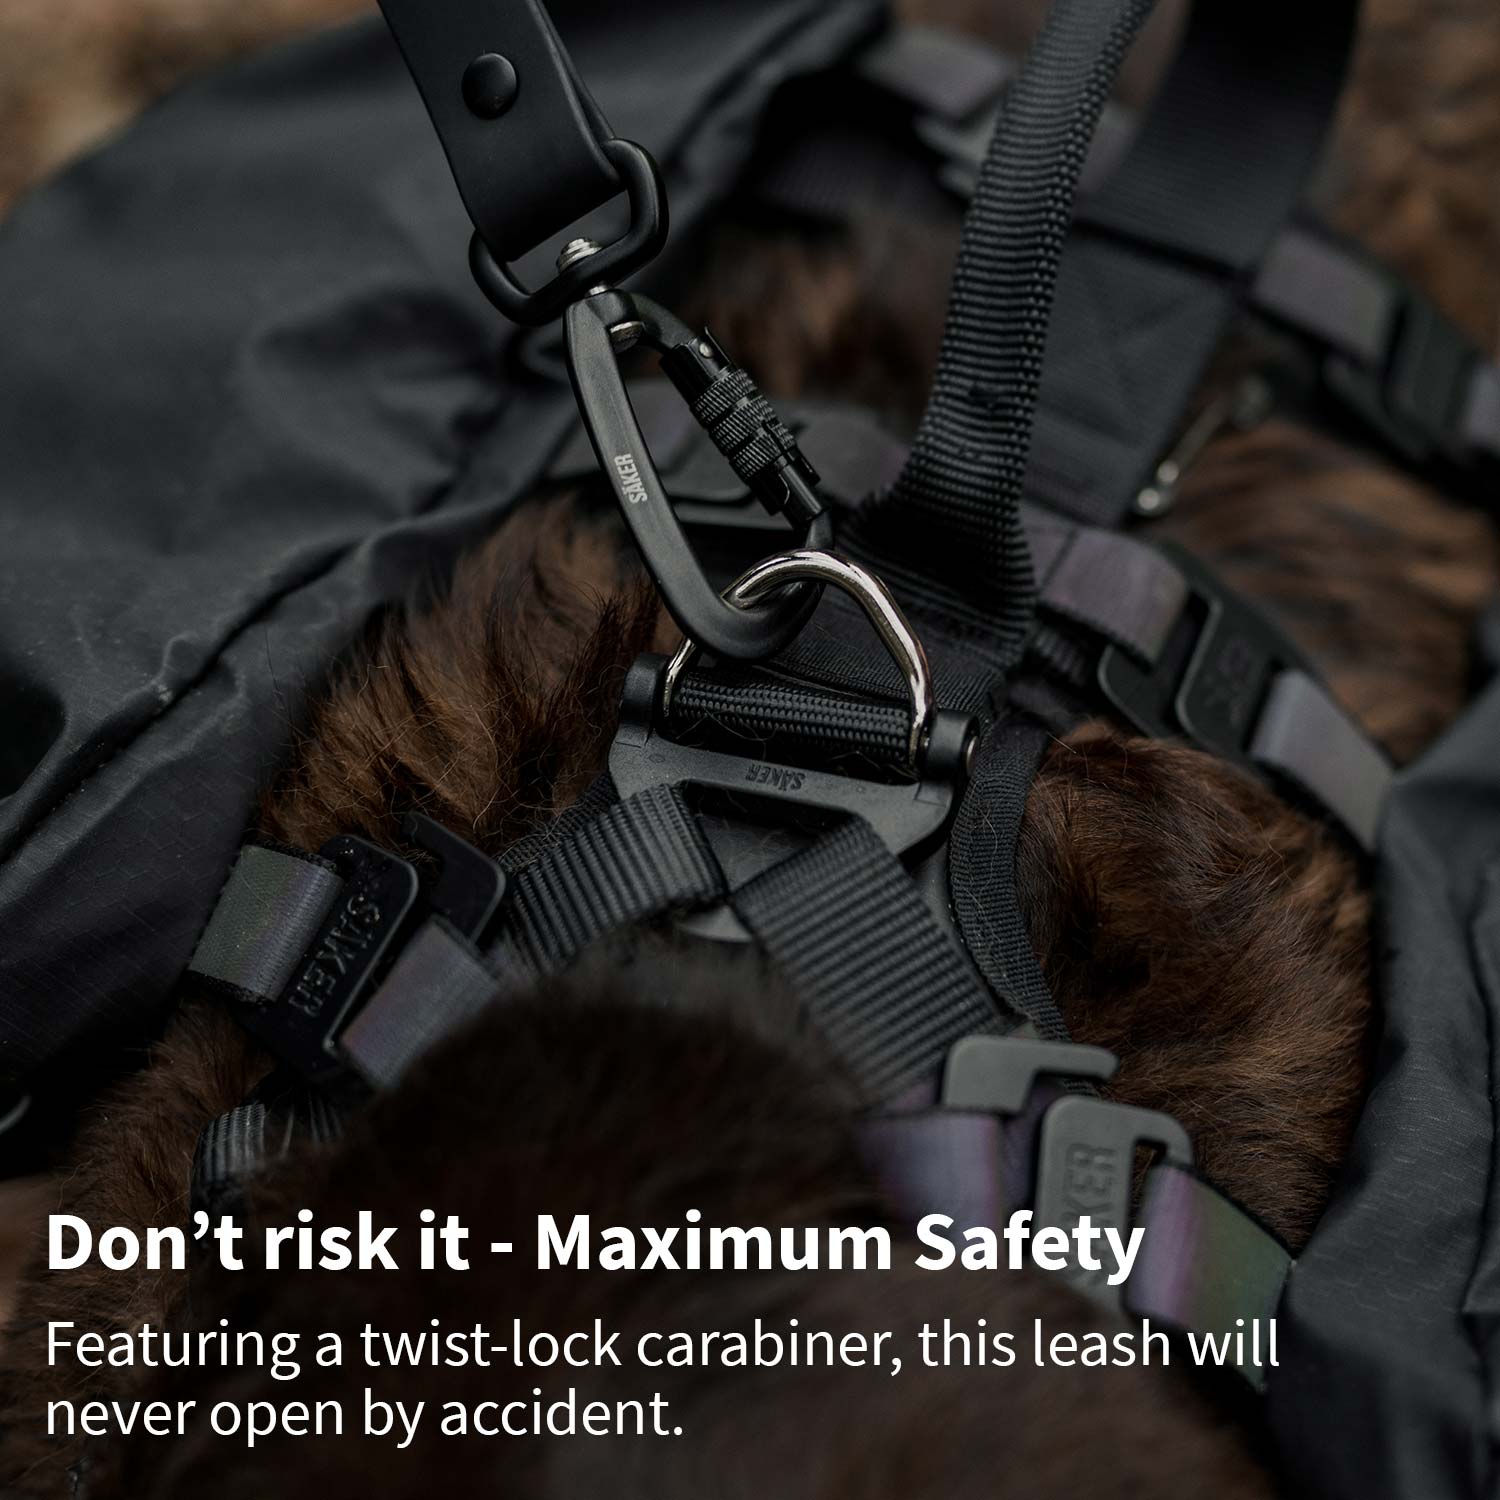 Close view of the leash carabiner